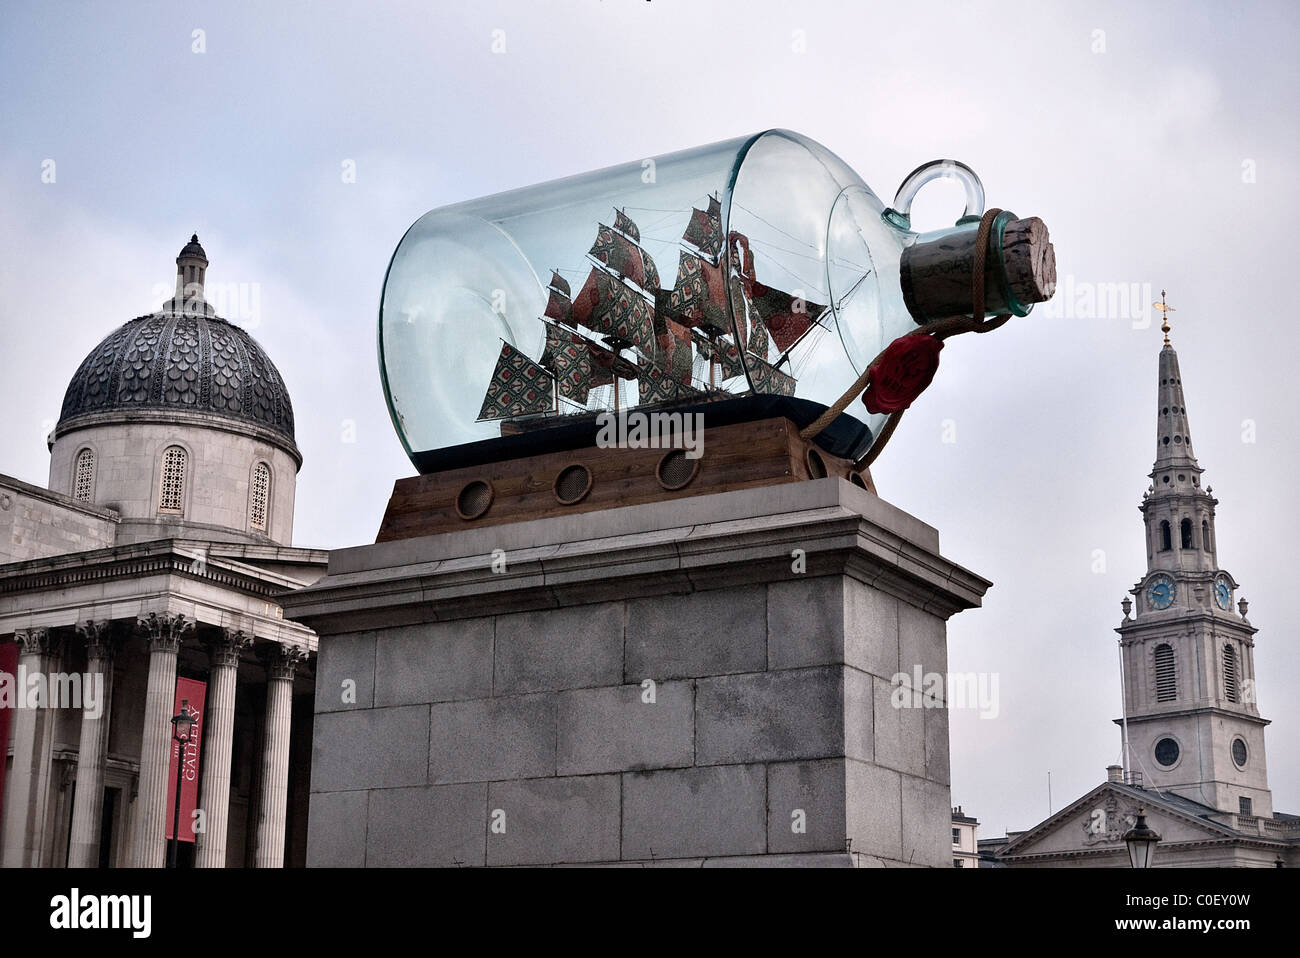 Model of HMS Victory in a bottle on the fourth plinth in Trafalgar Sq London a work by artist Yinka Shonibare Stock Photo